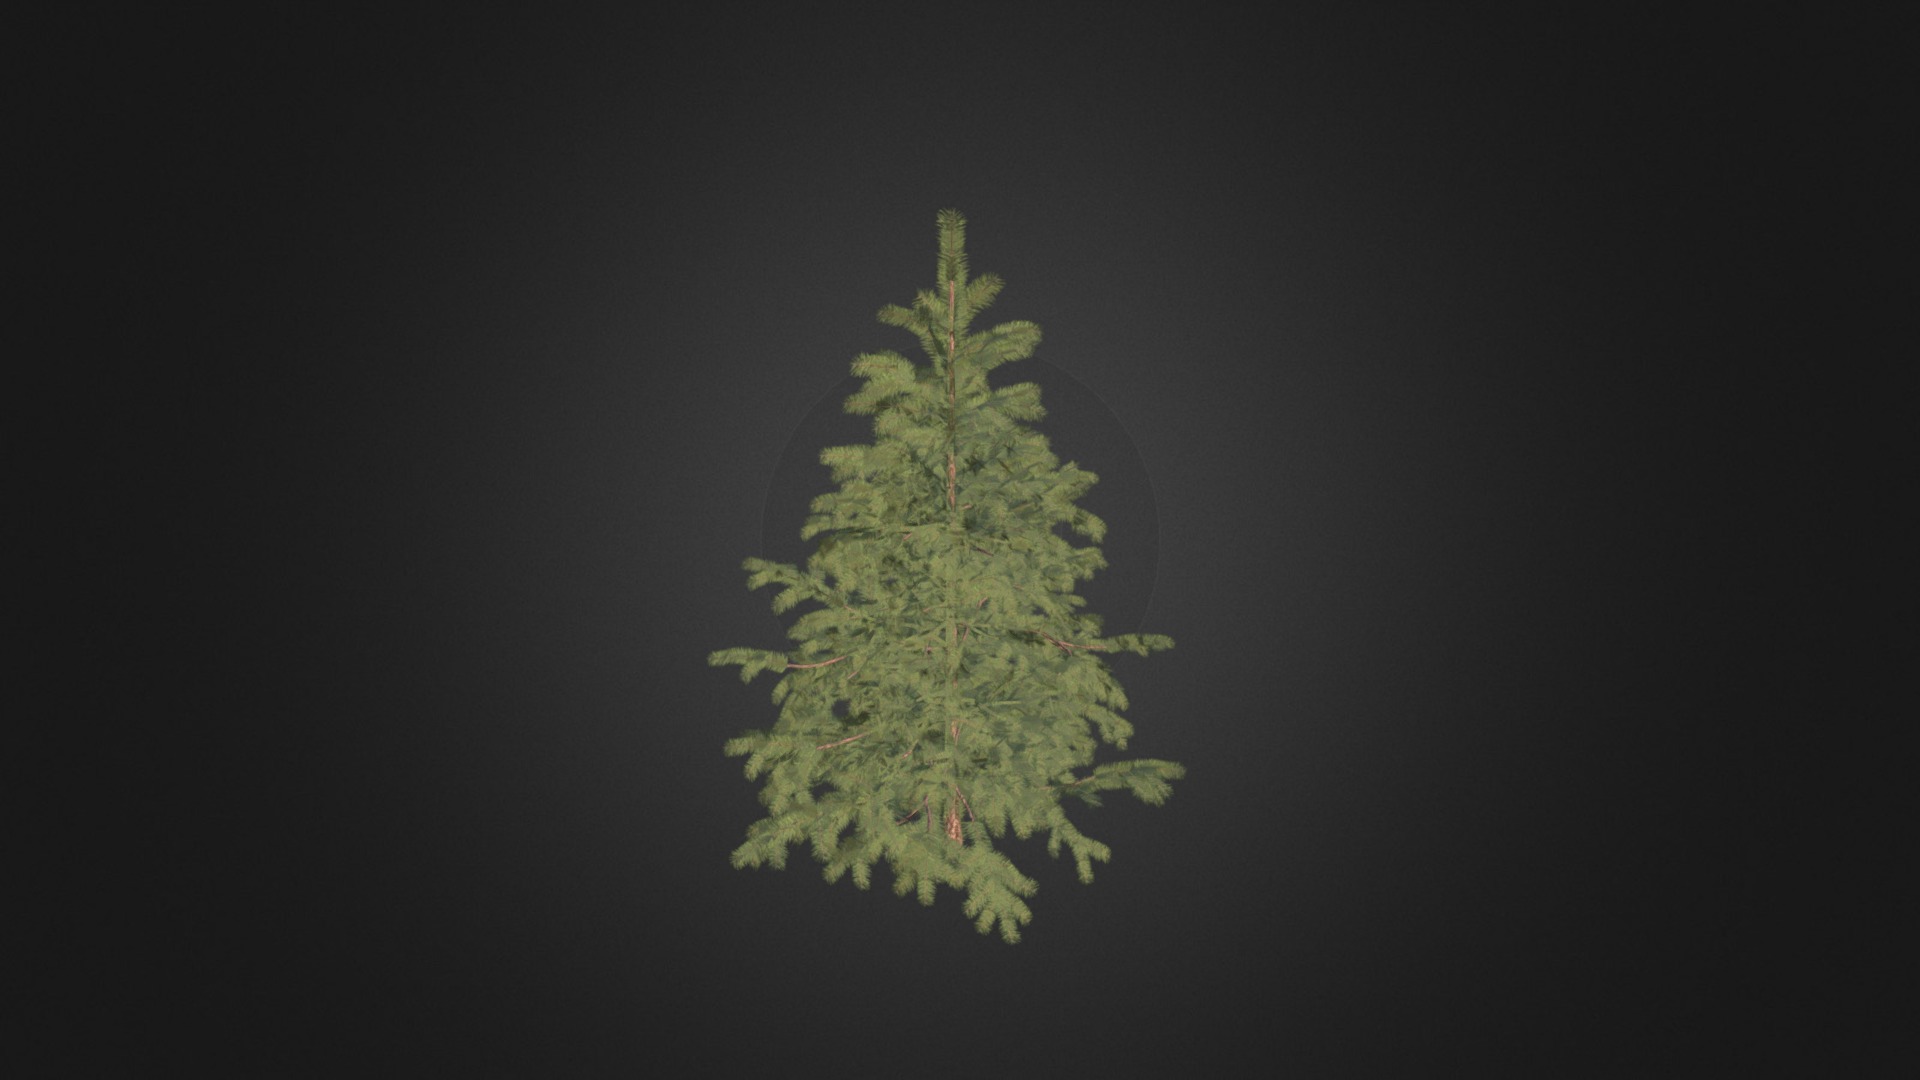 3D model Pine Tree 3D Model 2.3m - This is a 3D model of the Pine Tree 3D Model 2.3m. The 3D model is about a green tree with a dark background.